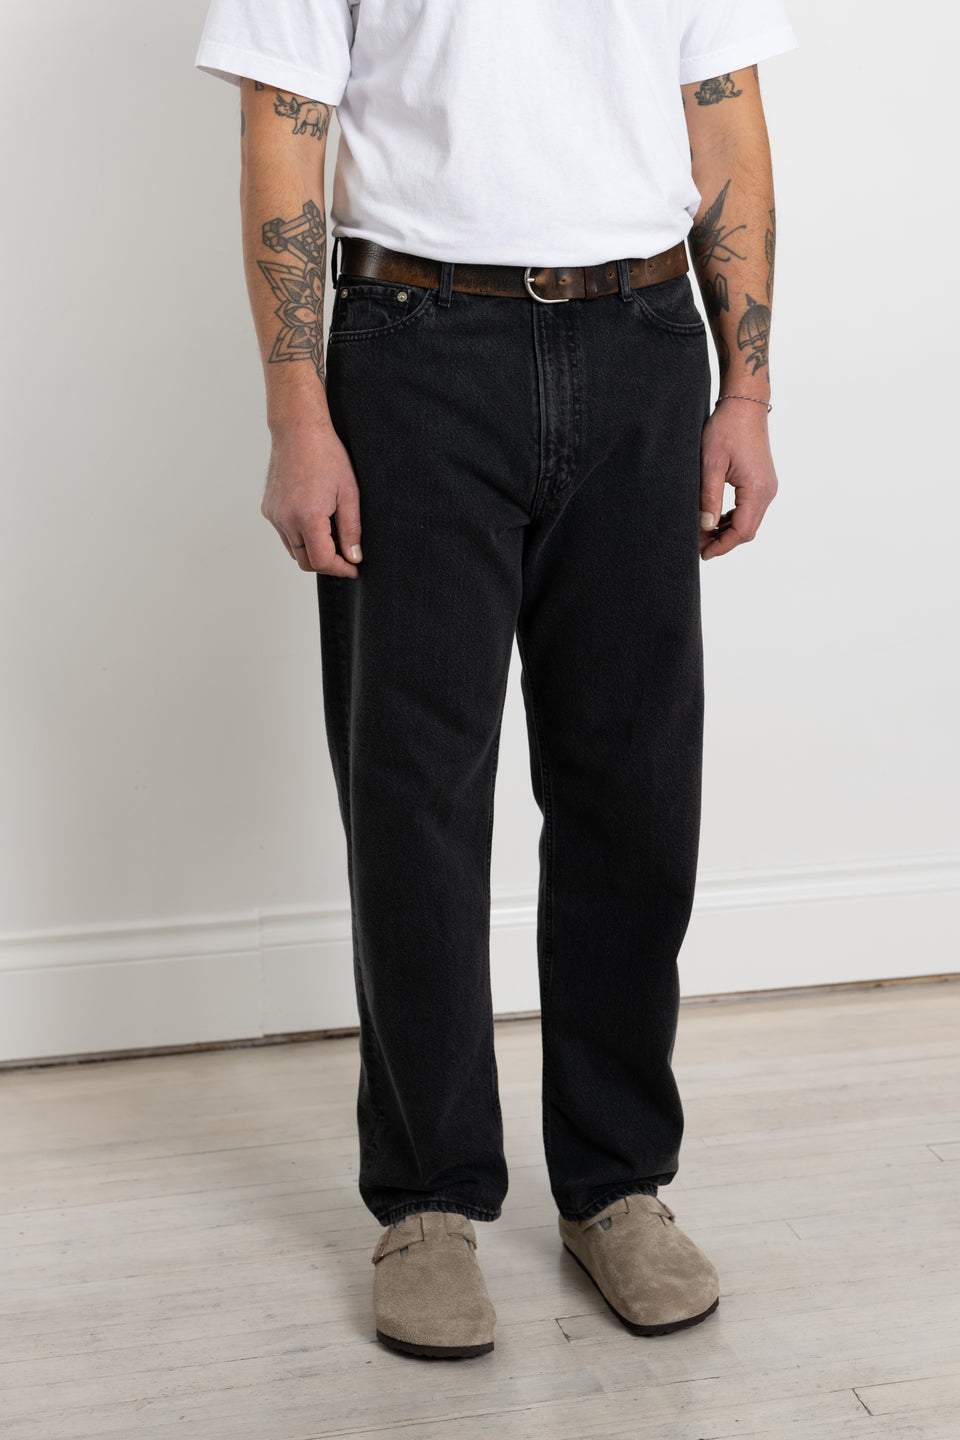 orSlow Japan 23AW FW23 Men's Collection 101 Dad's Fit Denim Jeans Black Stone Wash Calculus Victoria BC Canada